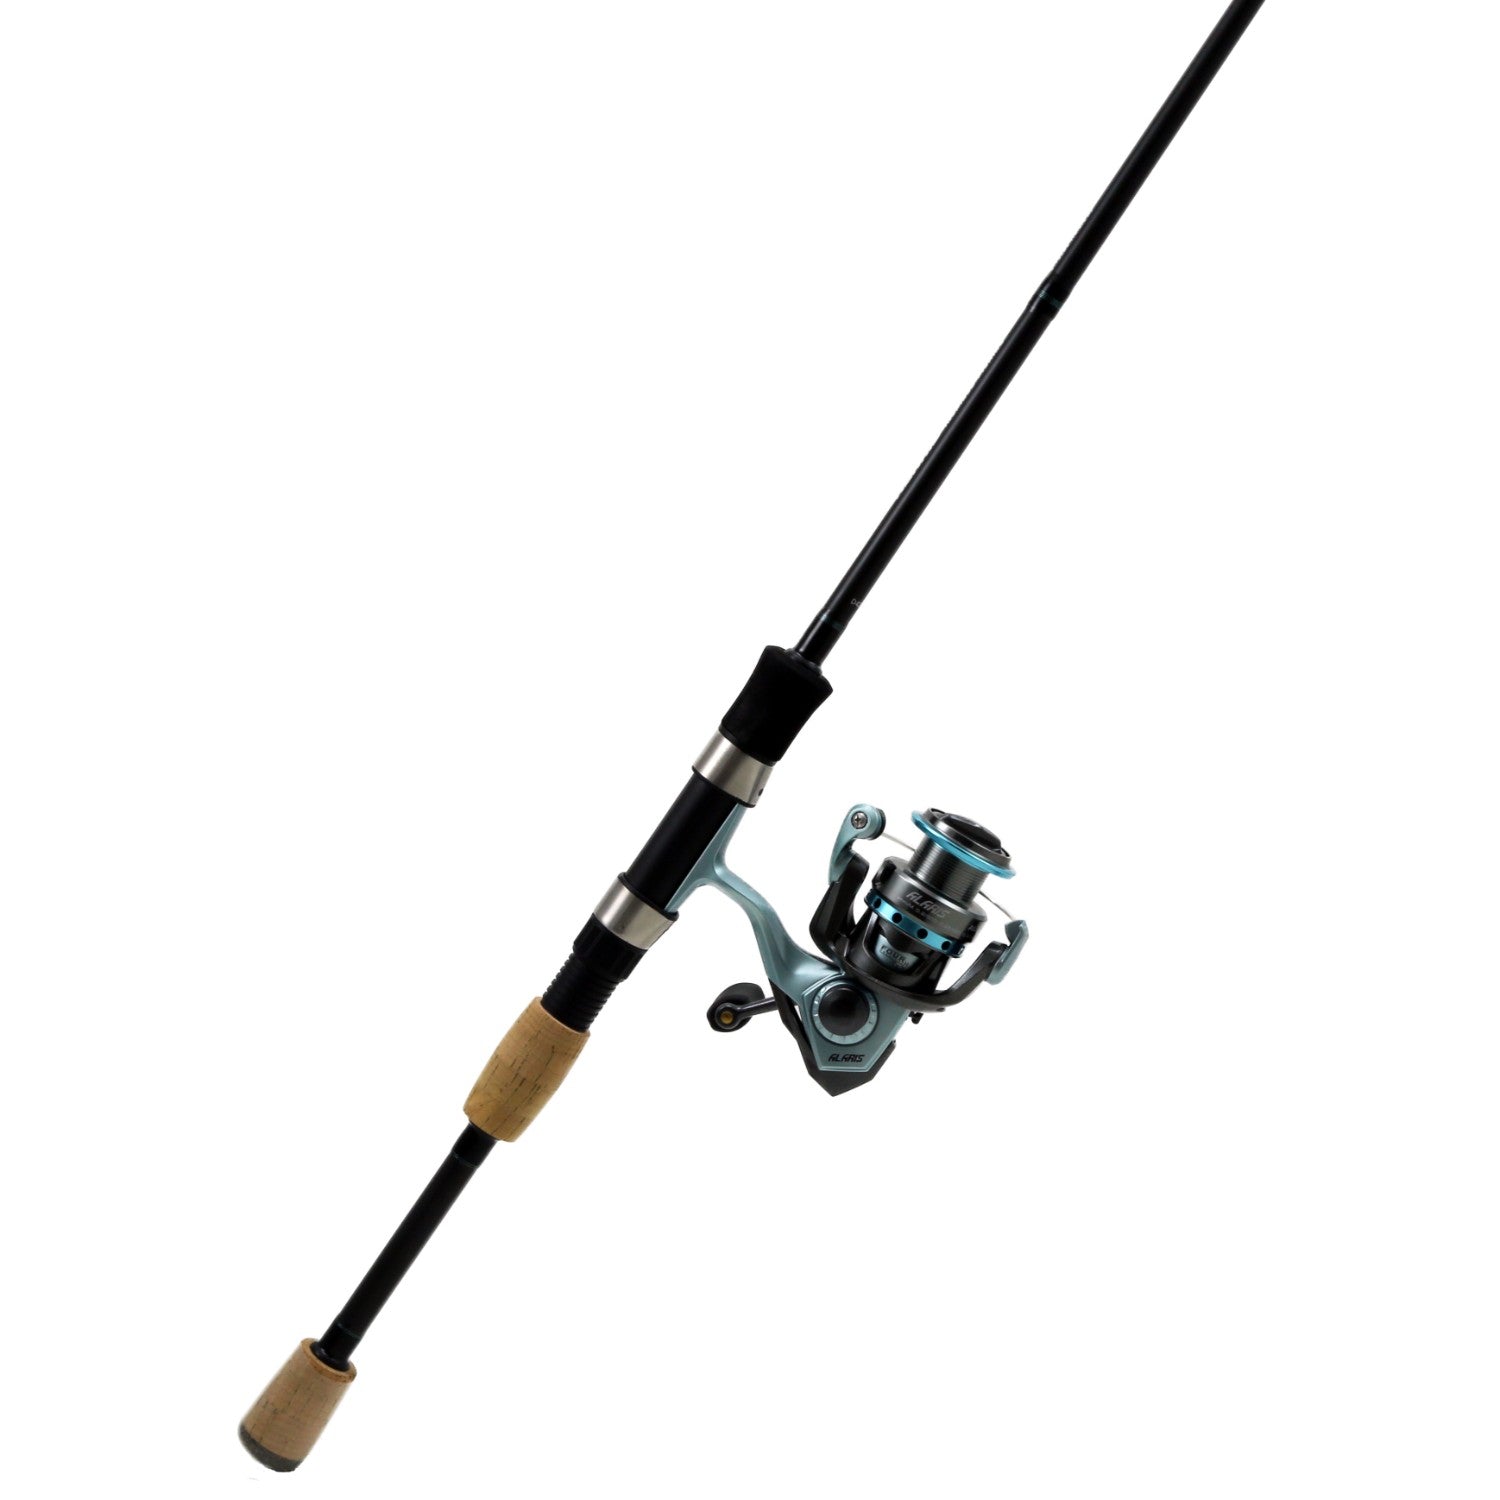 BnM Silver Cat Elite Rod 7.5 ft 1 pc – Fishing in the USA